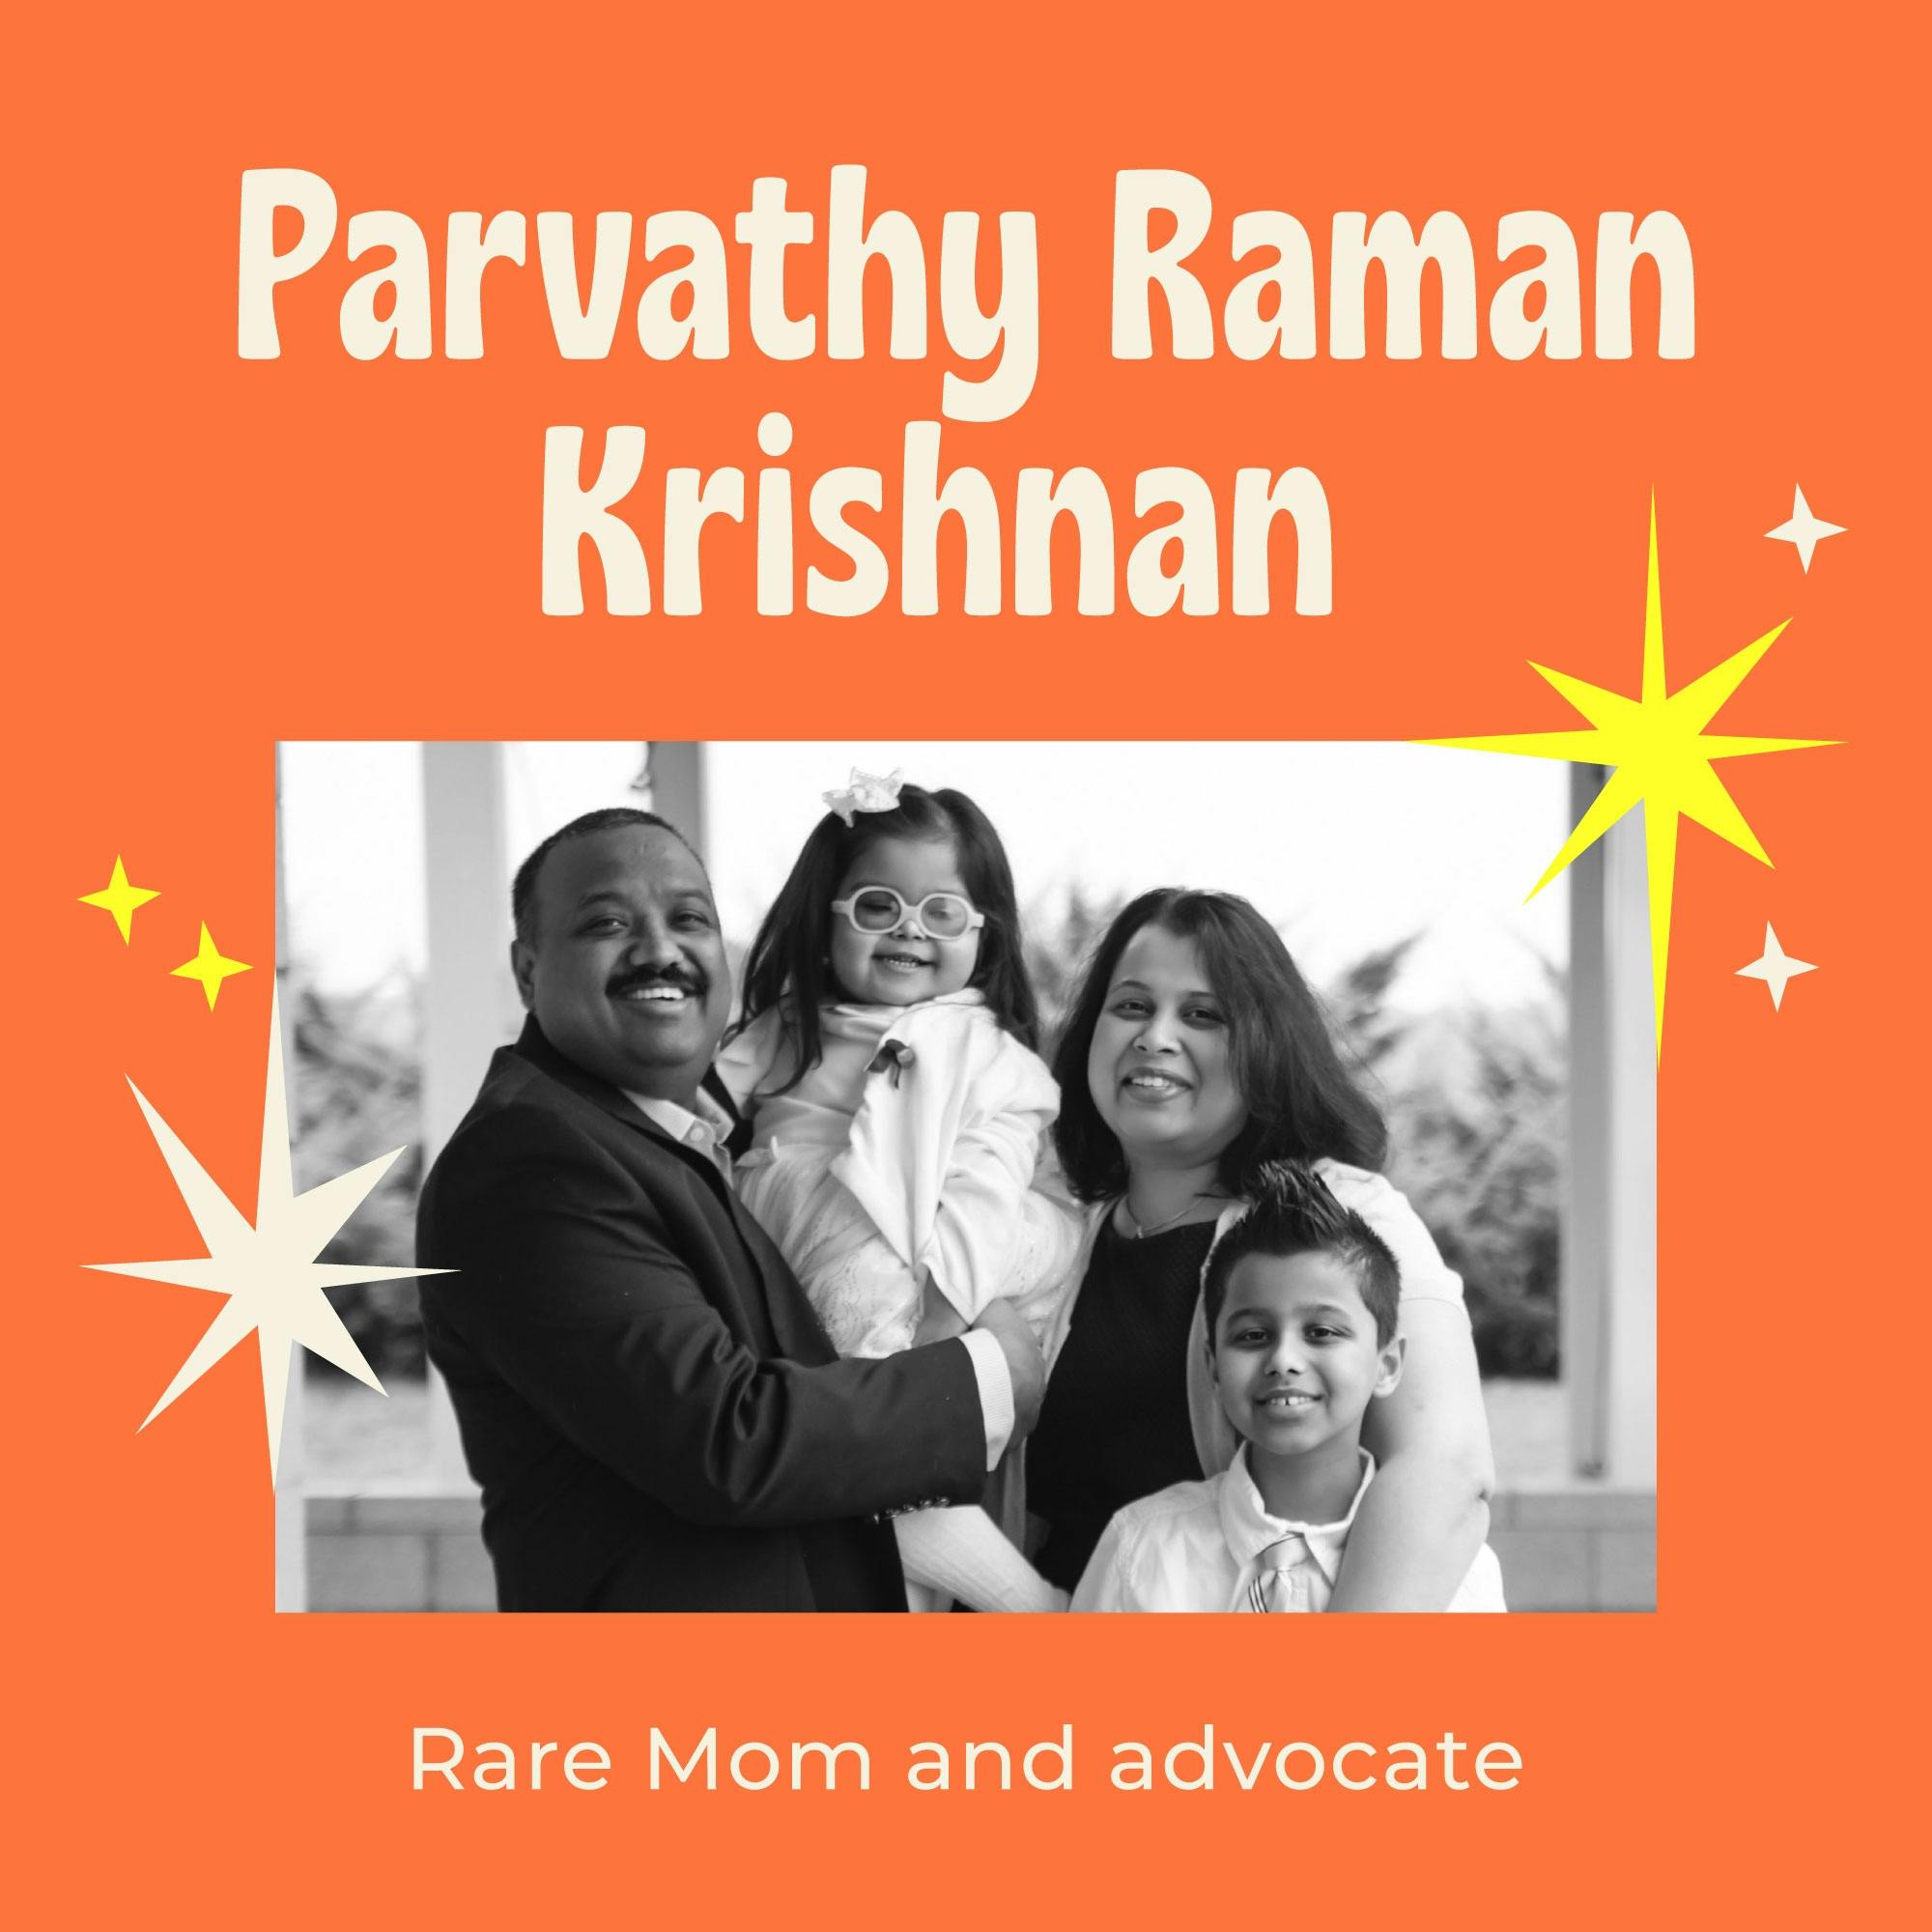 Ambiguous Medical Plans – How to Figure Out a System Even When it Seems Impossible with Parvathy Raman Krishnan